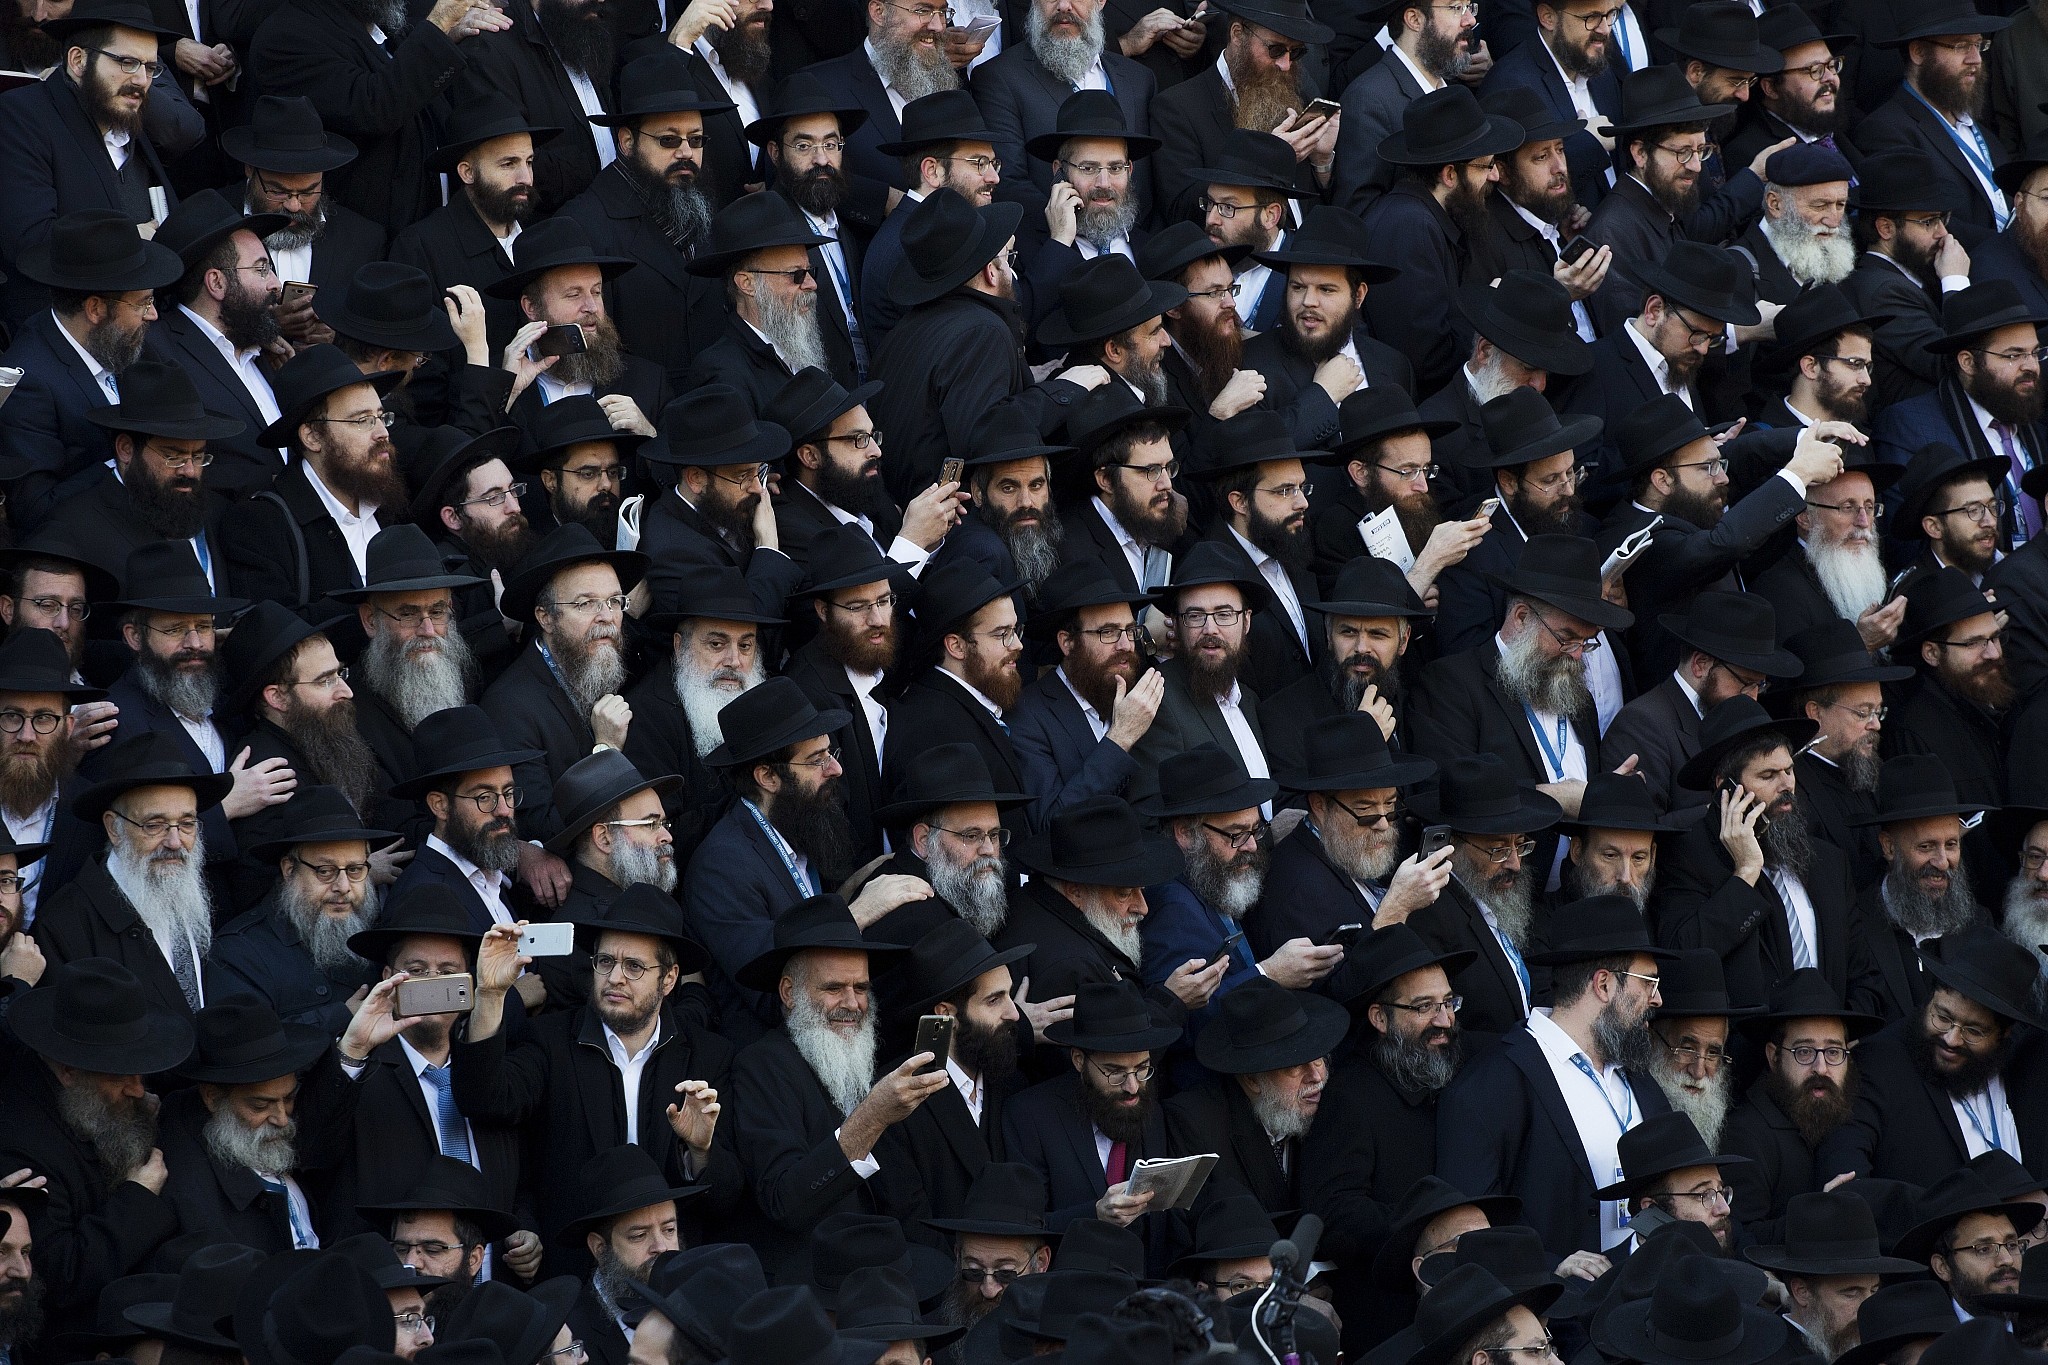 Crowds of rabbis gather for a group photo at the Chabad-Lubavitch World Headquarters, November 4, 2018, in New York.(AP Photo/Mark Lennihan)